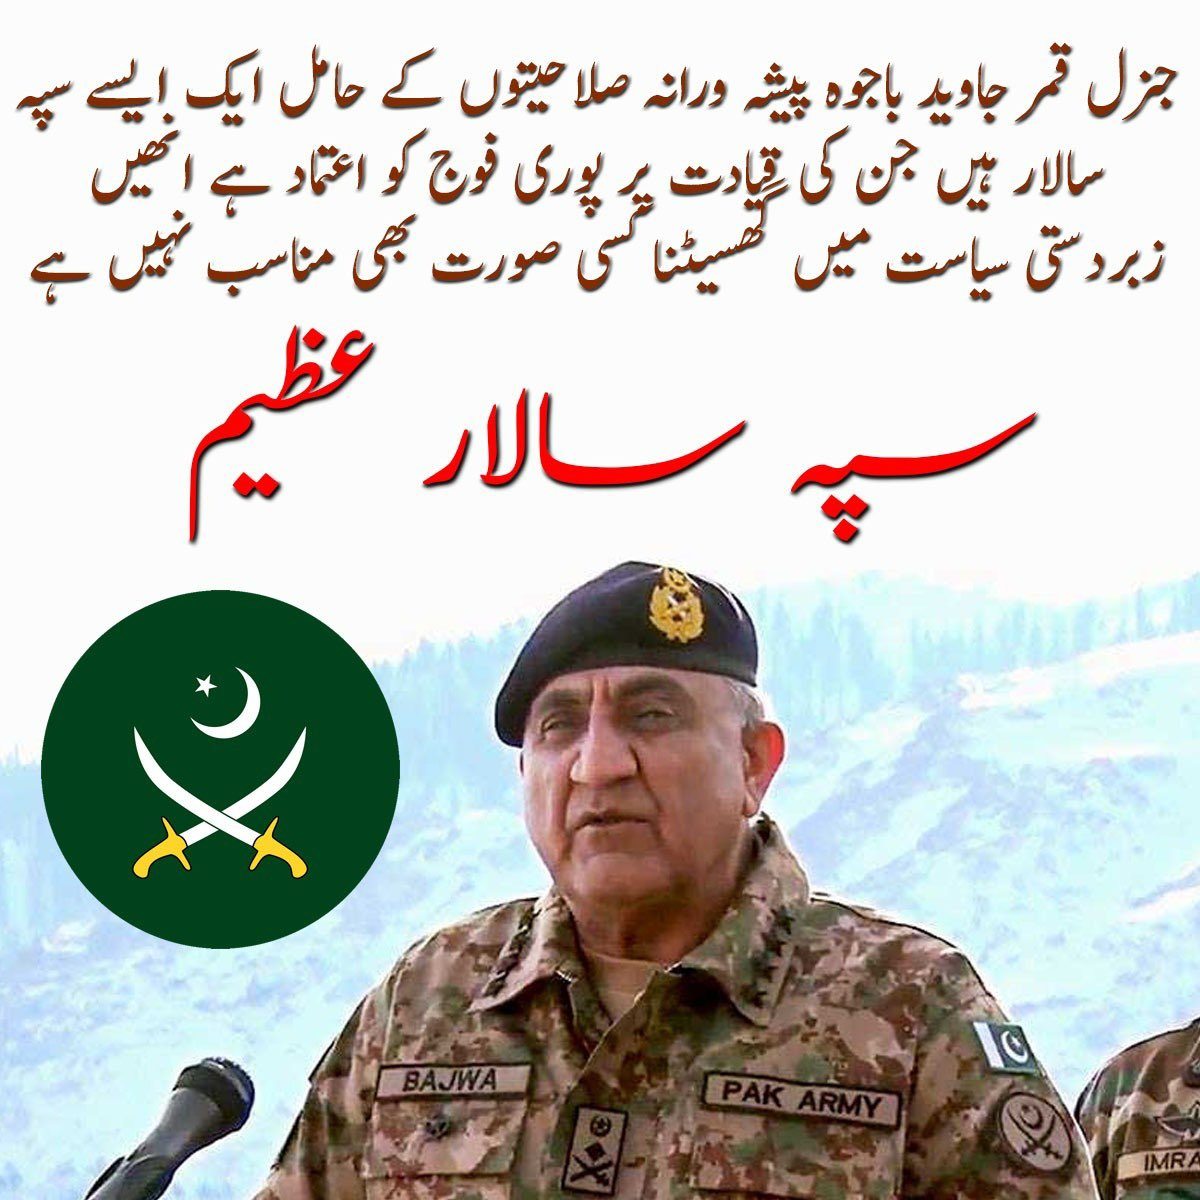 One of the best Generals of Pakistan. It’s cause of him the Terrorism was eradicated from Pakistan.
#BehindYouBajwa 
#GenBajwaWillStay